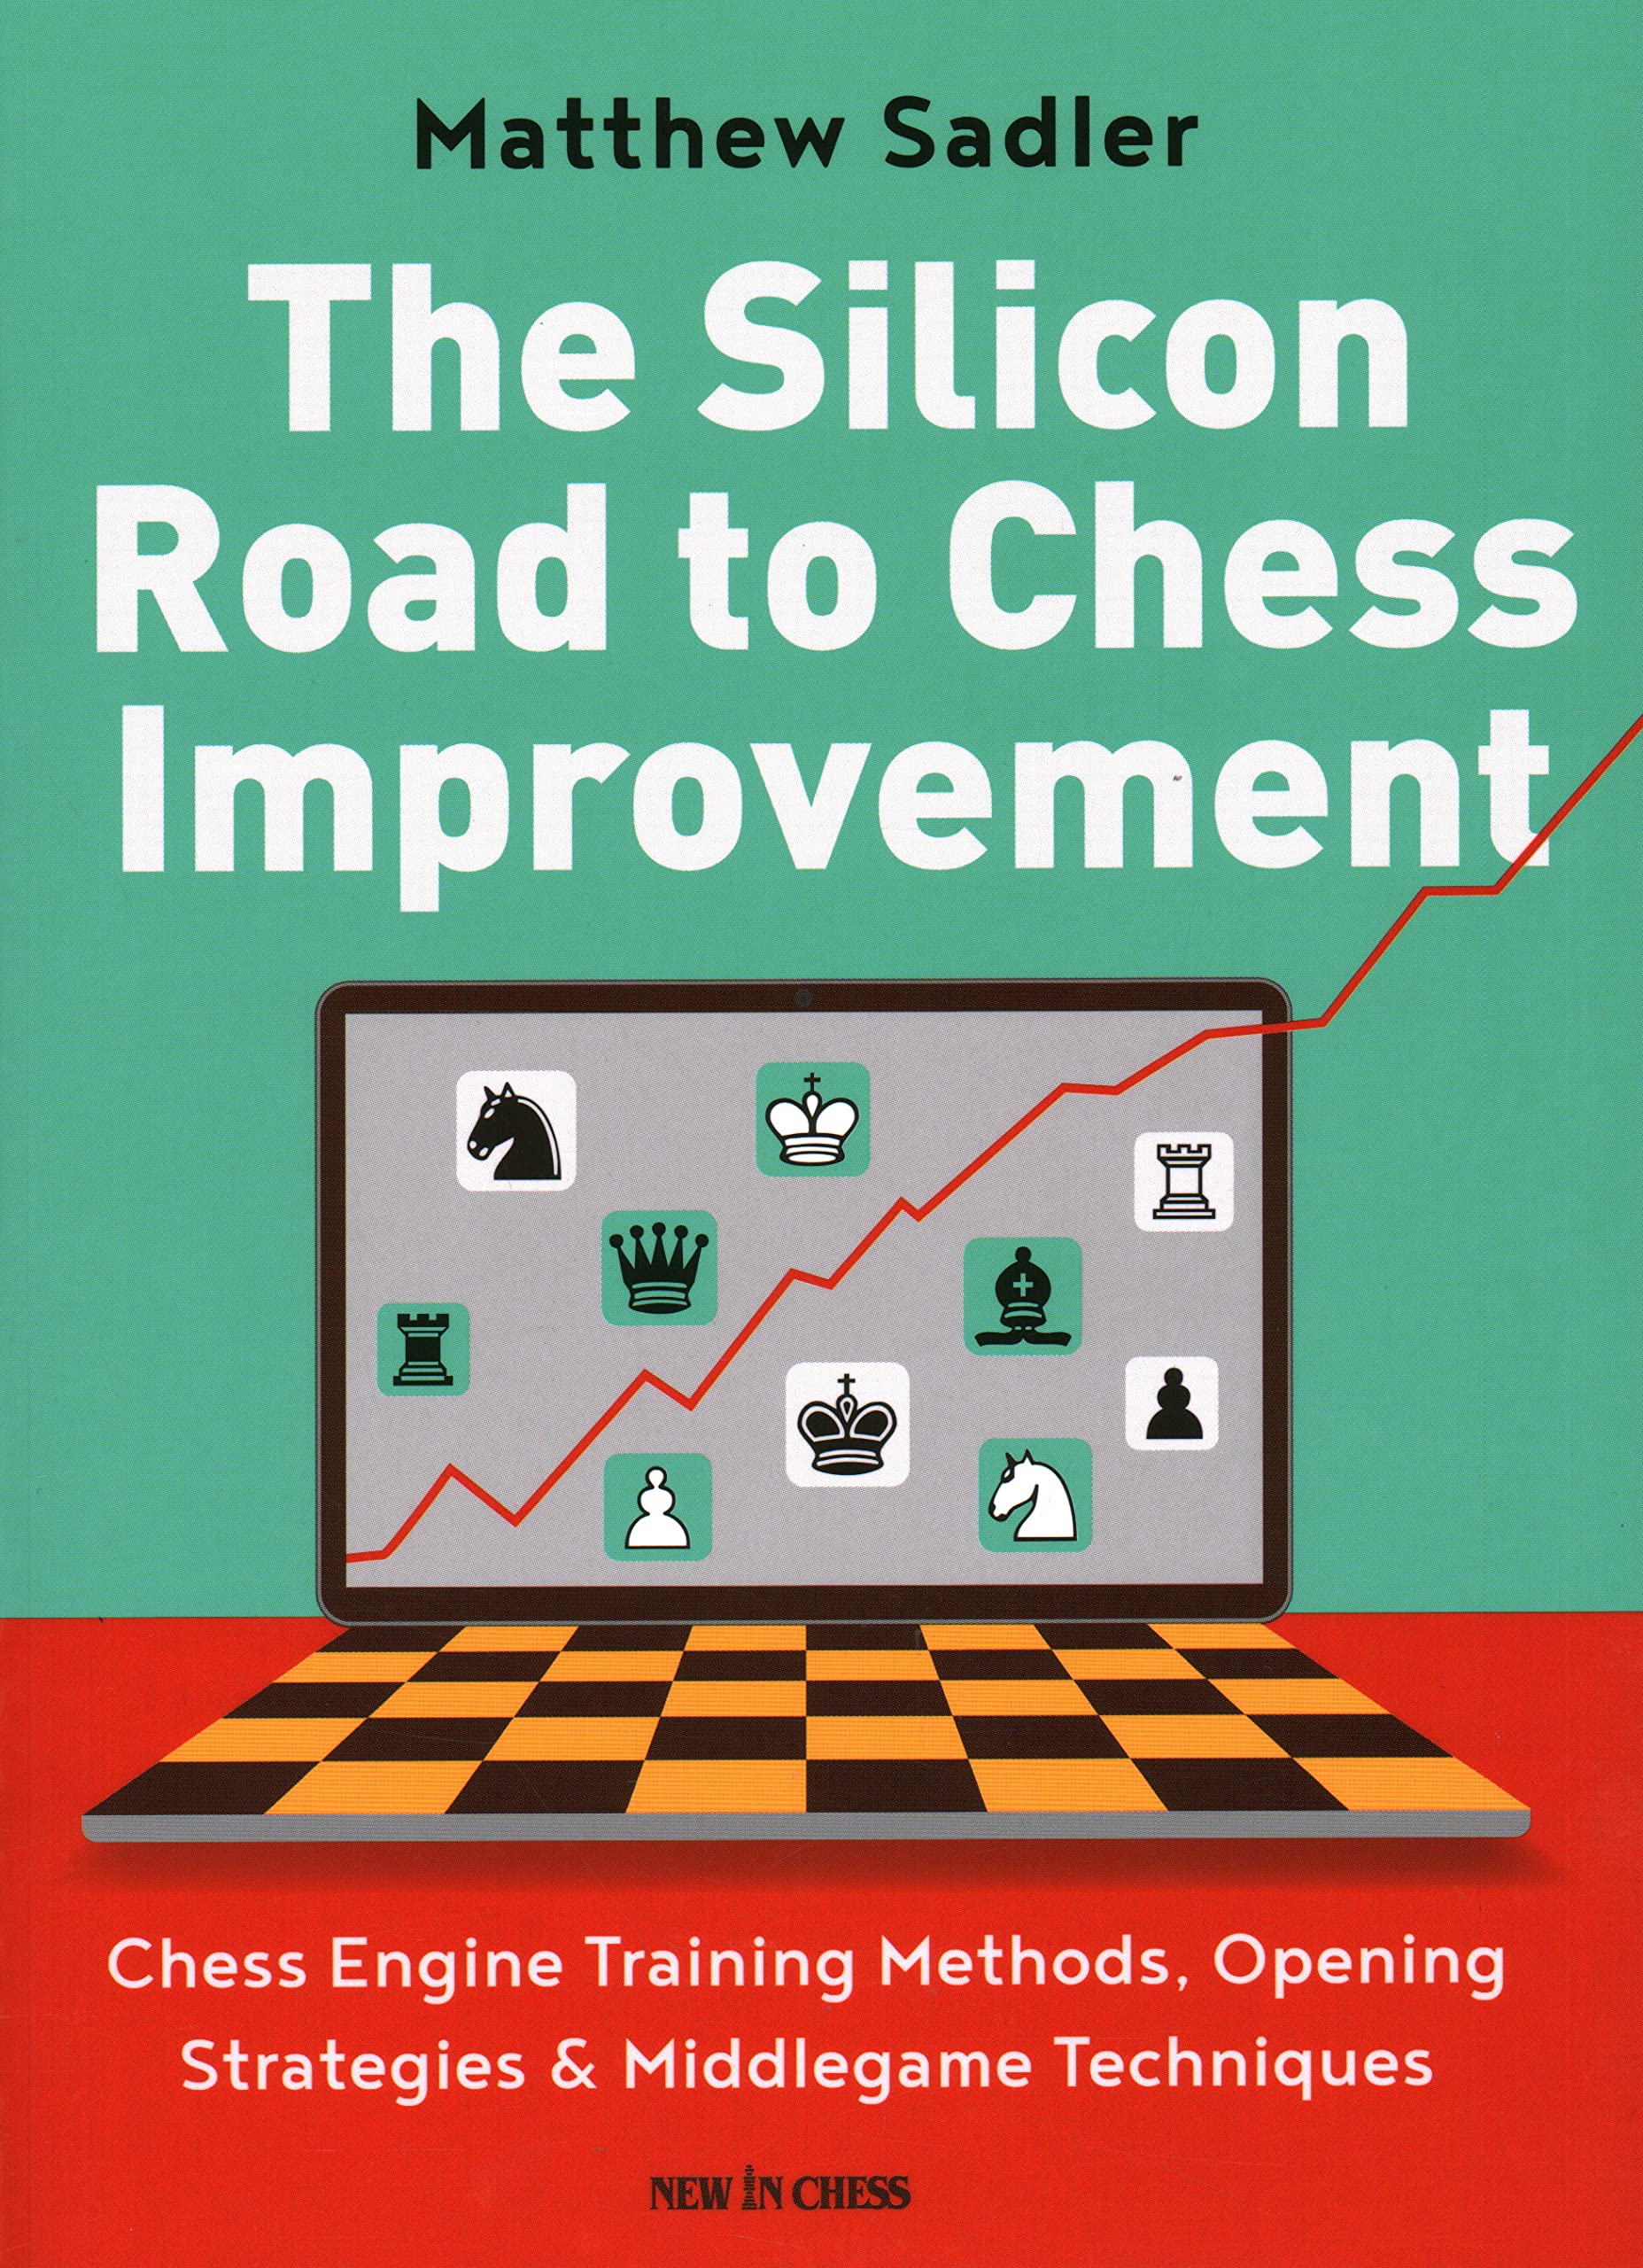 The Silicon Road To Chess Improvement: Chess Engine Training Methods, Opening Strategies & Middlegame Techniques, Matthew Sadler, New in Chess, 31st December 2021, ISBN-13 ‏ : ‎ 978-9056919832